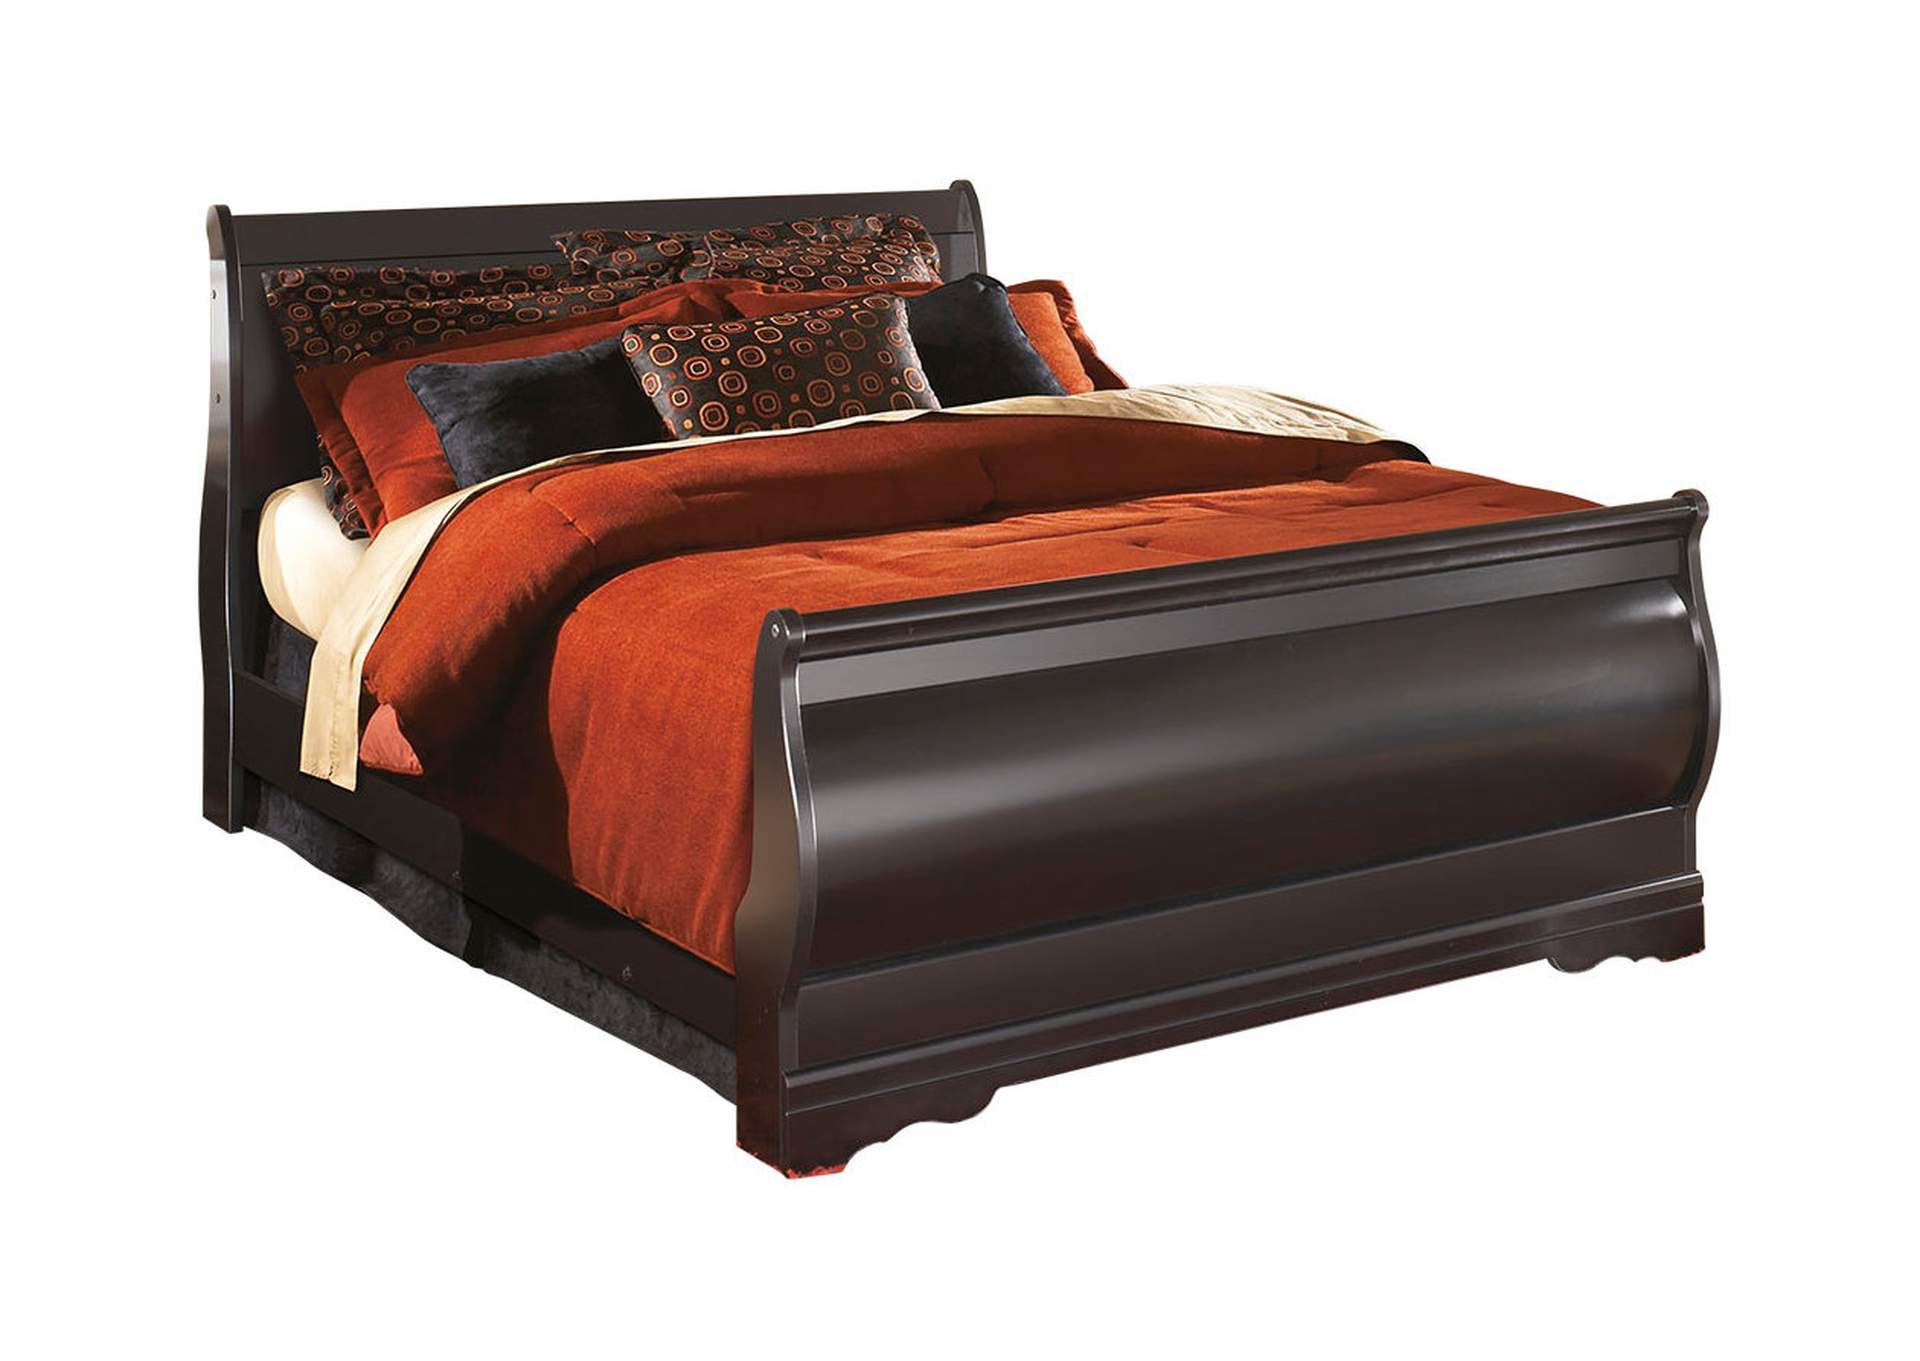 Huey Vineyard Queen Sleigh Bed with Dresser, Mirror and Chest of Drawers,Signature Design By Ashley